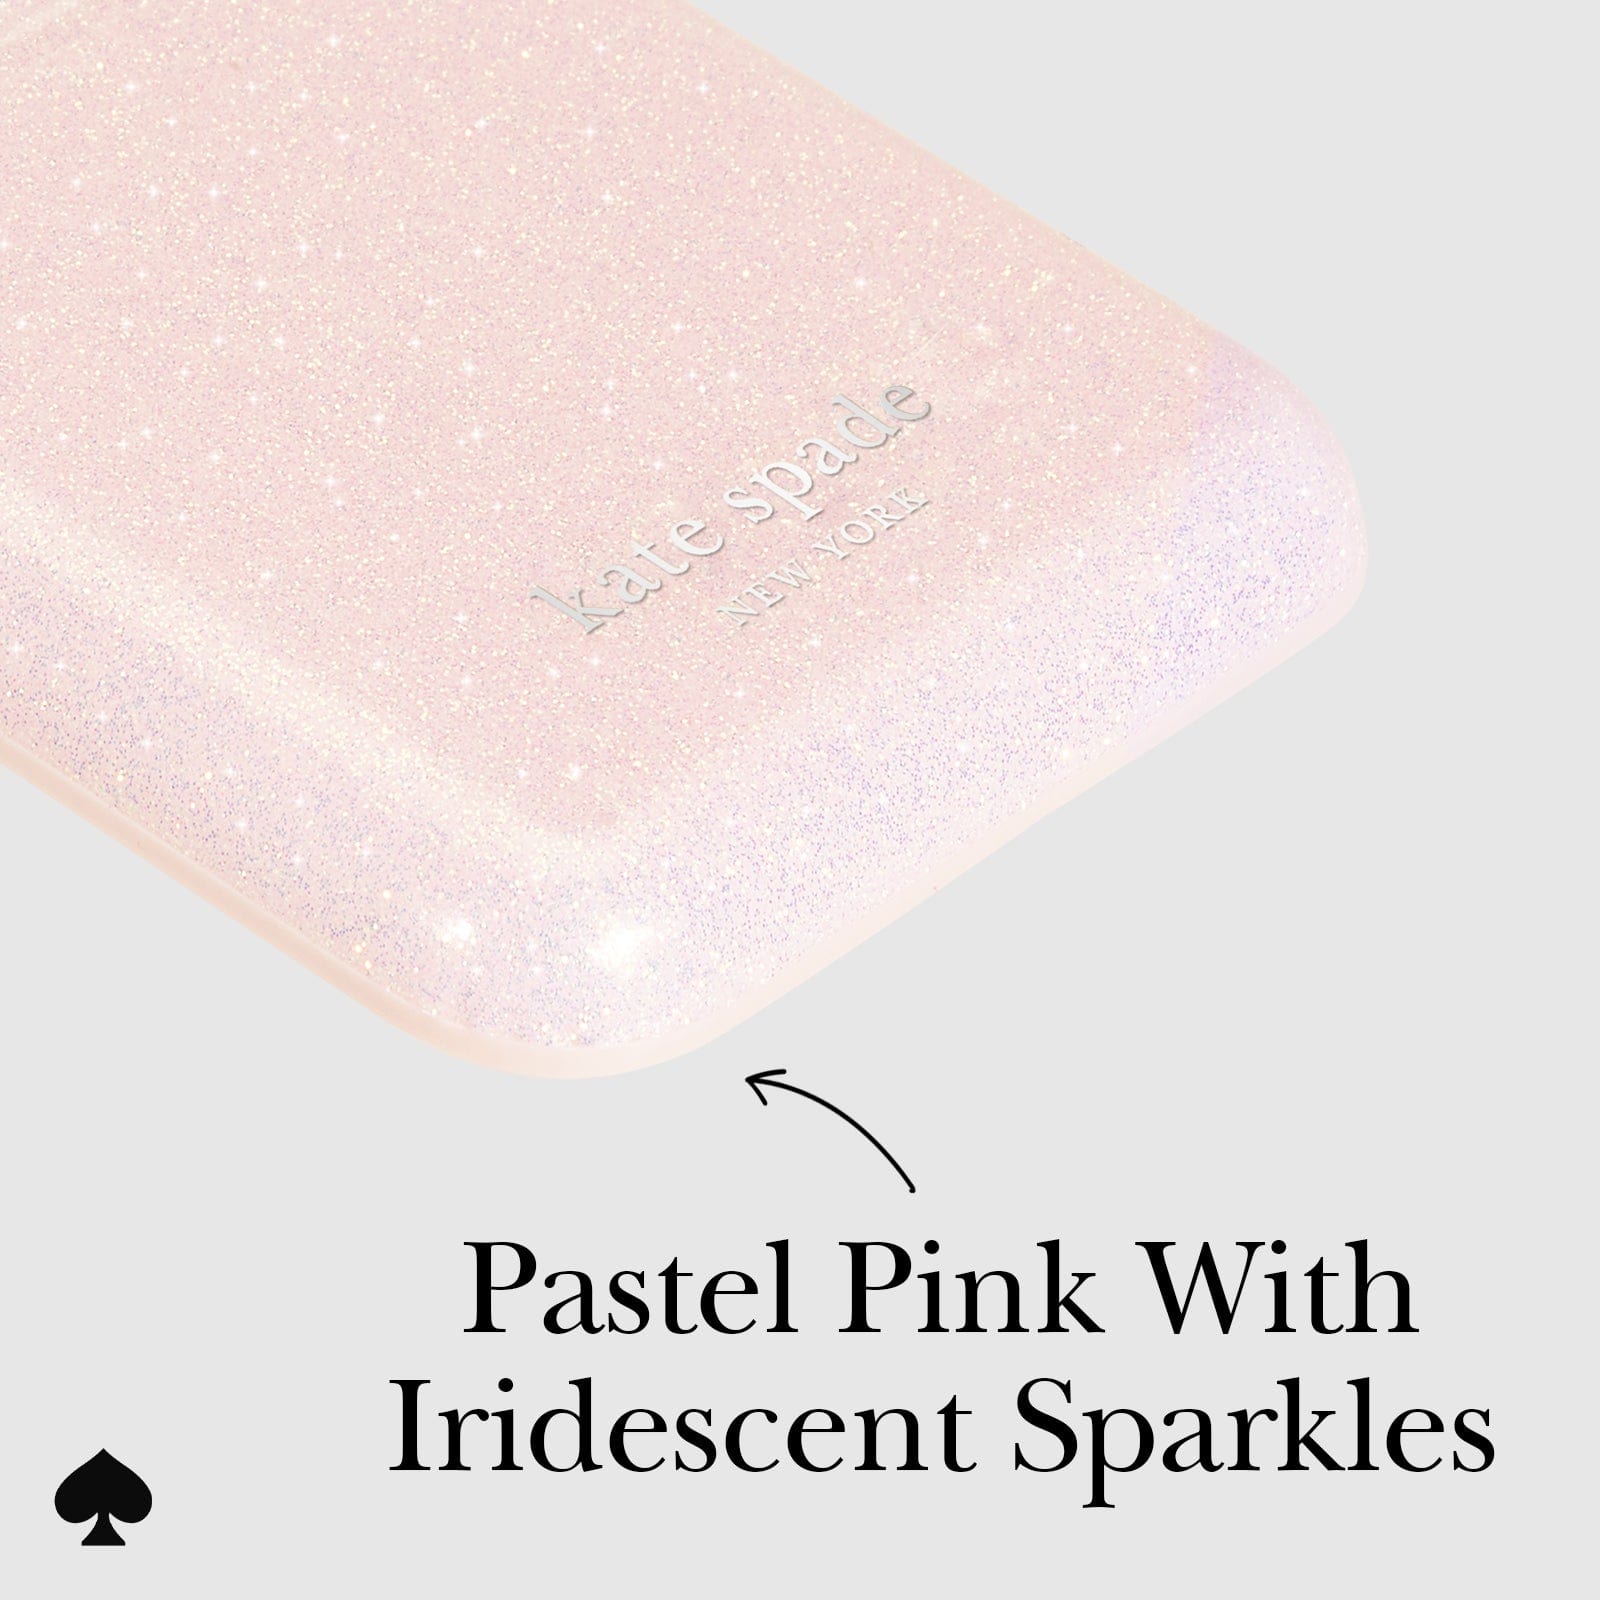 PASTEL PINK WITH IRIDESCENT SPARKLES